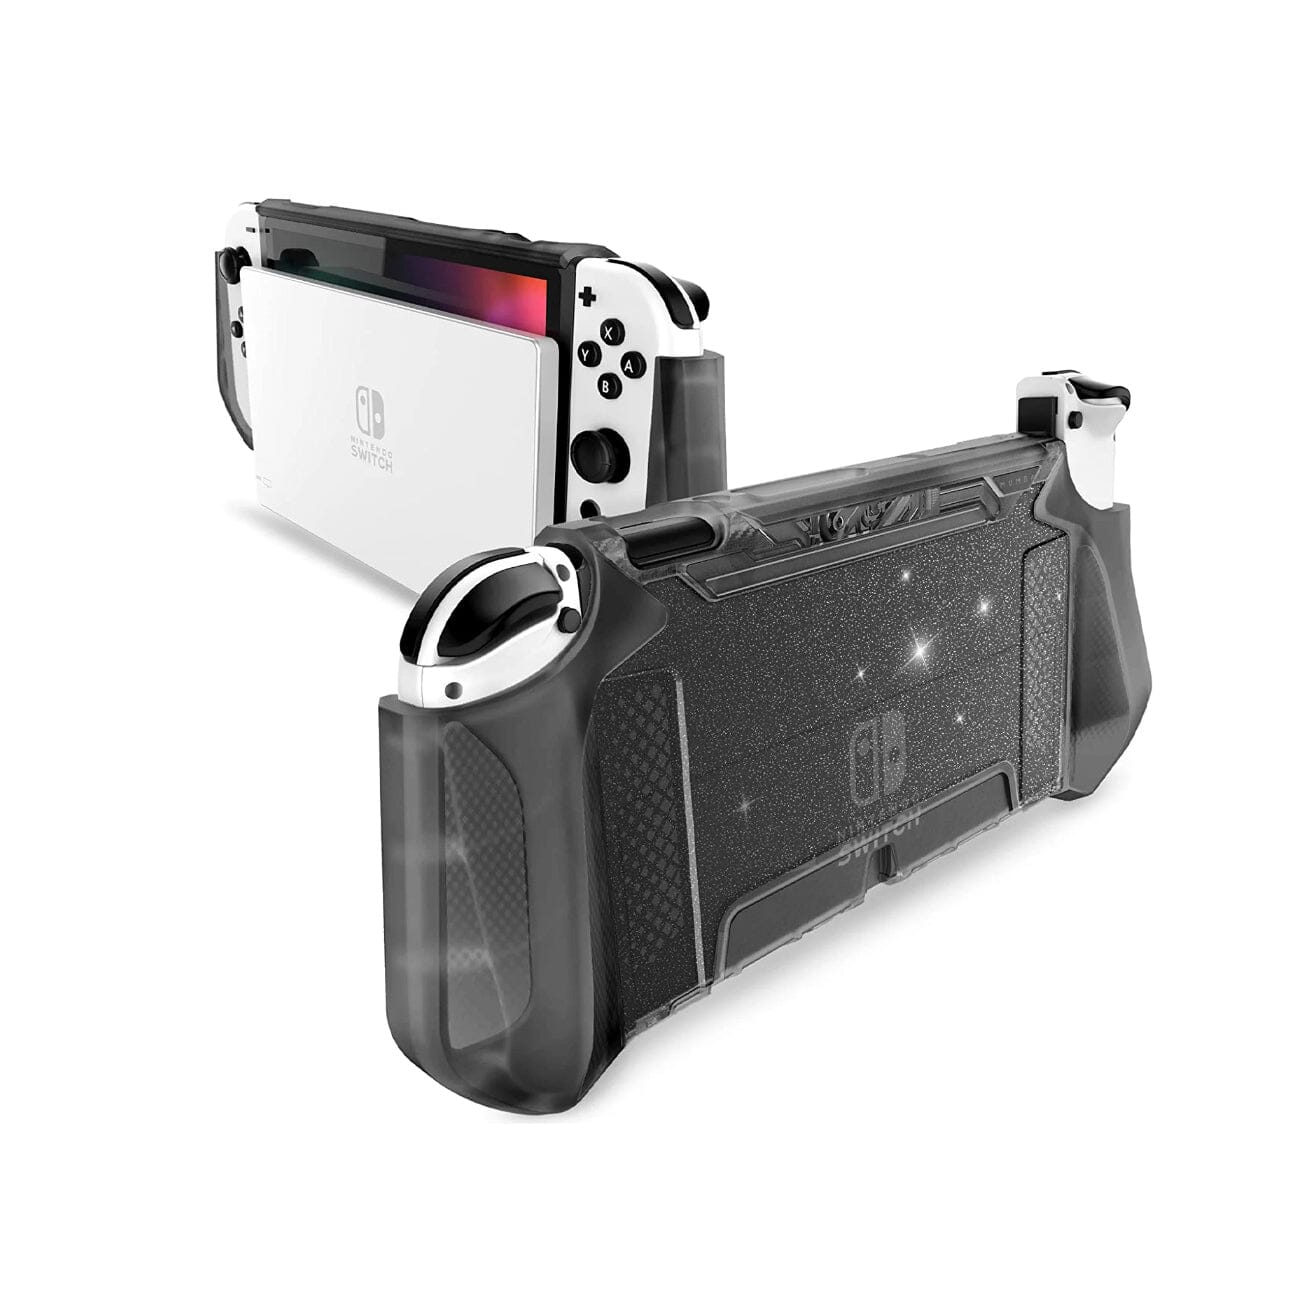 Mumba Blade Series Dockable Protective Grip Case for Nintendo Switch OLED Model (2021) Default Mumba Shadow 